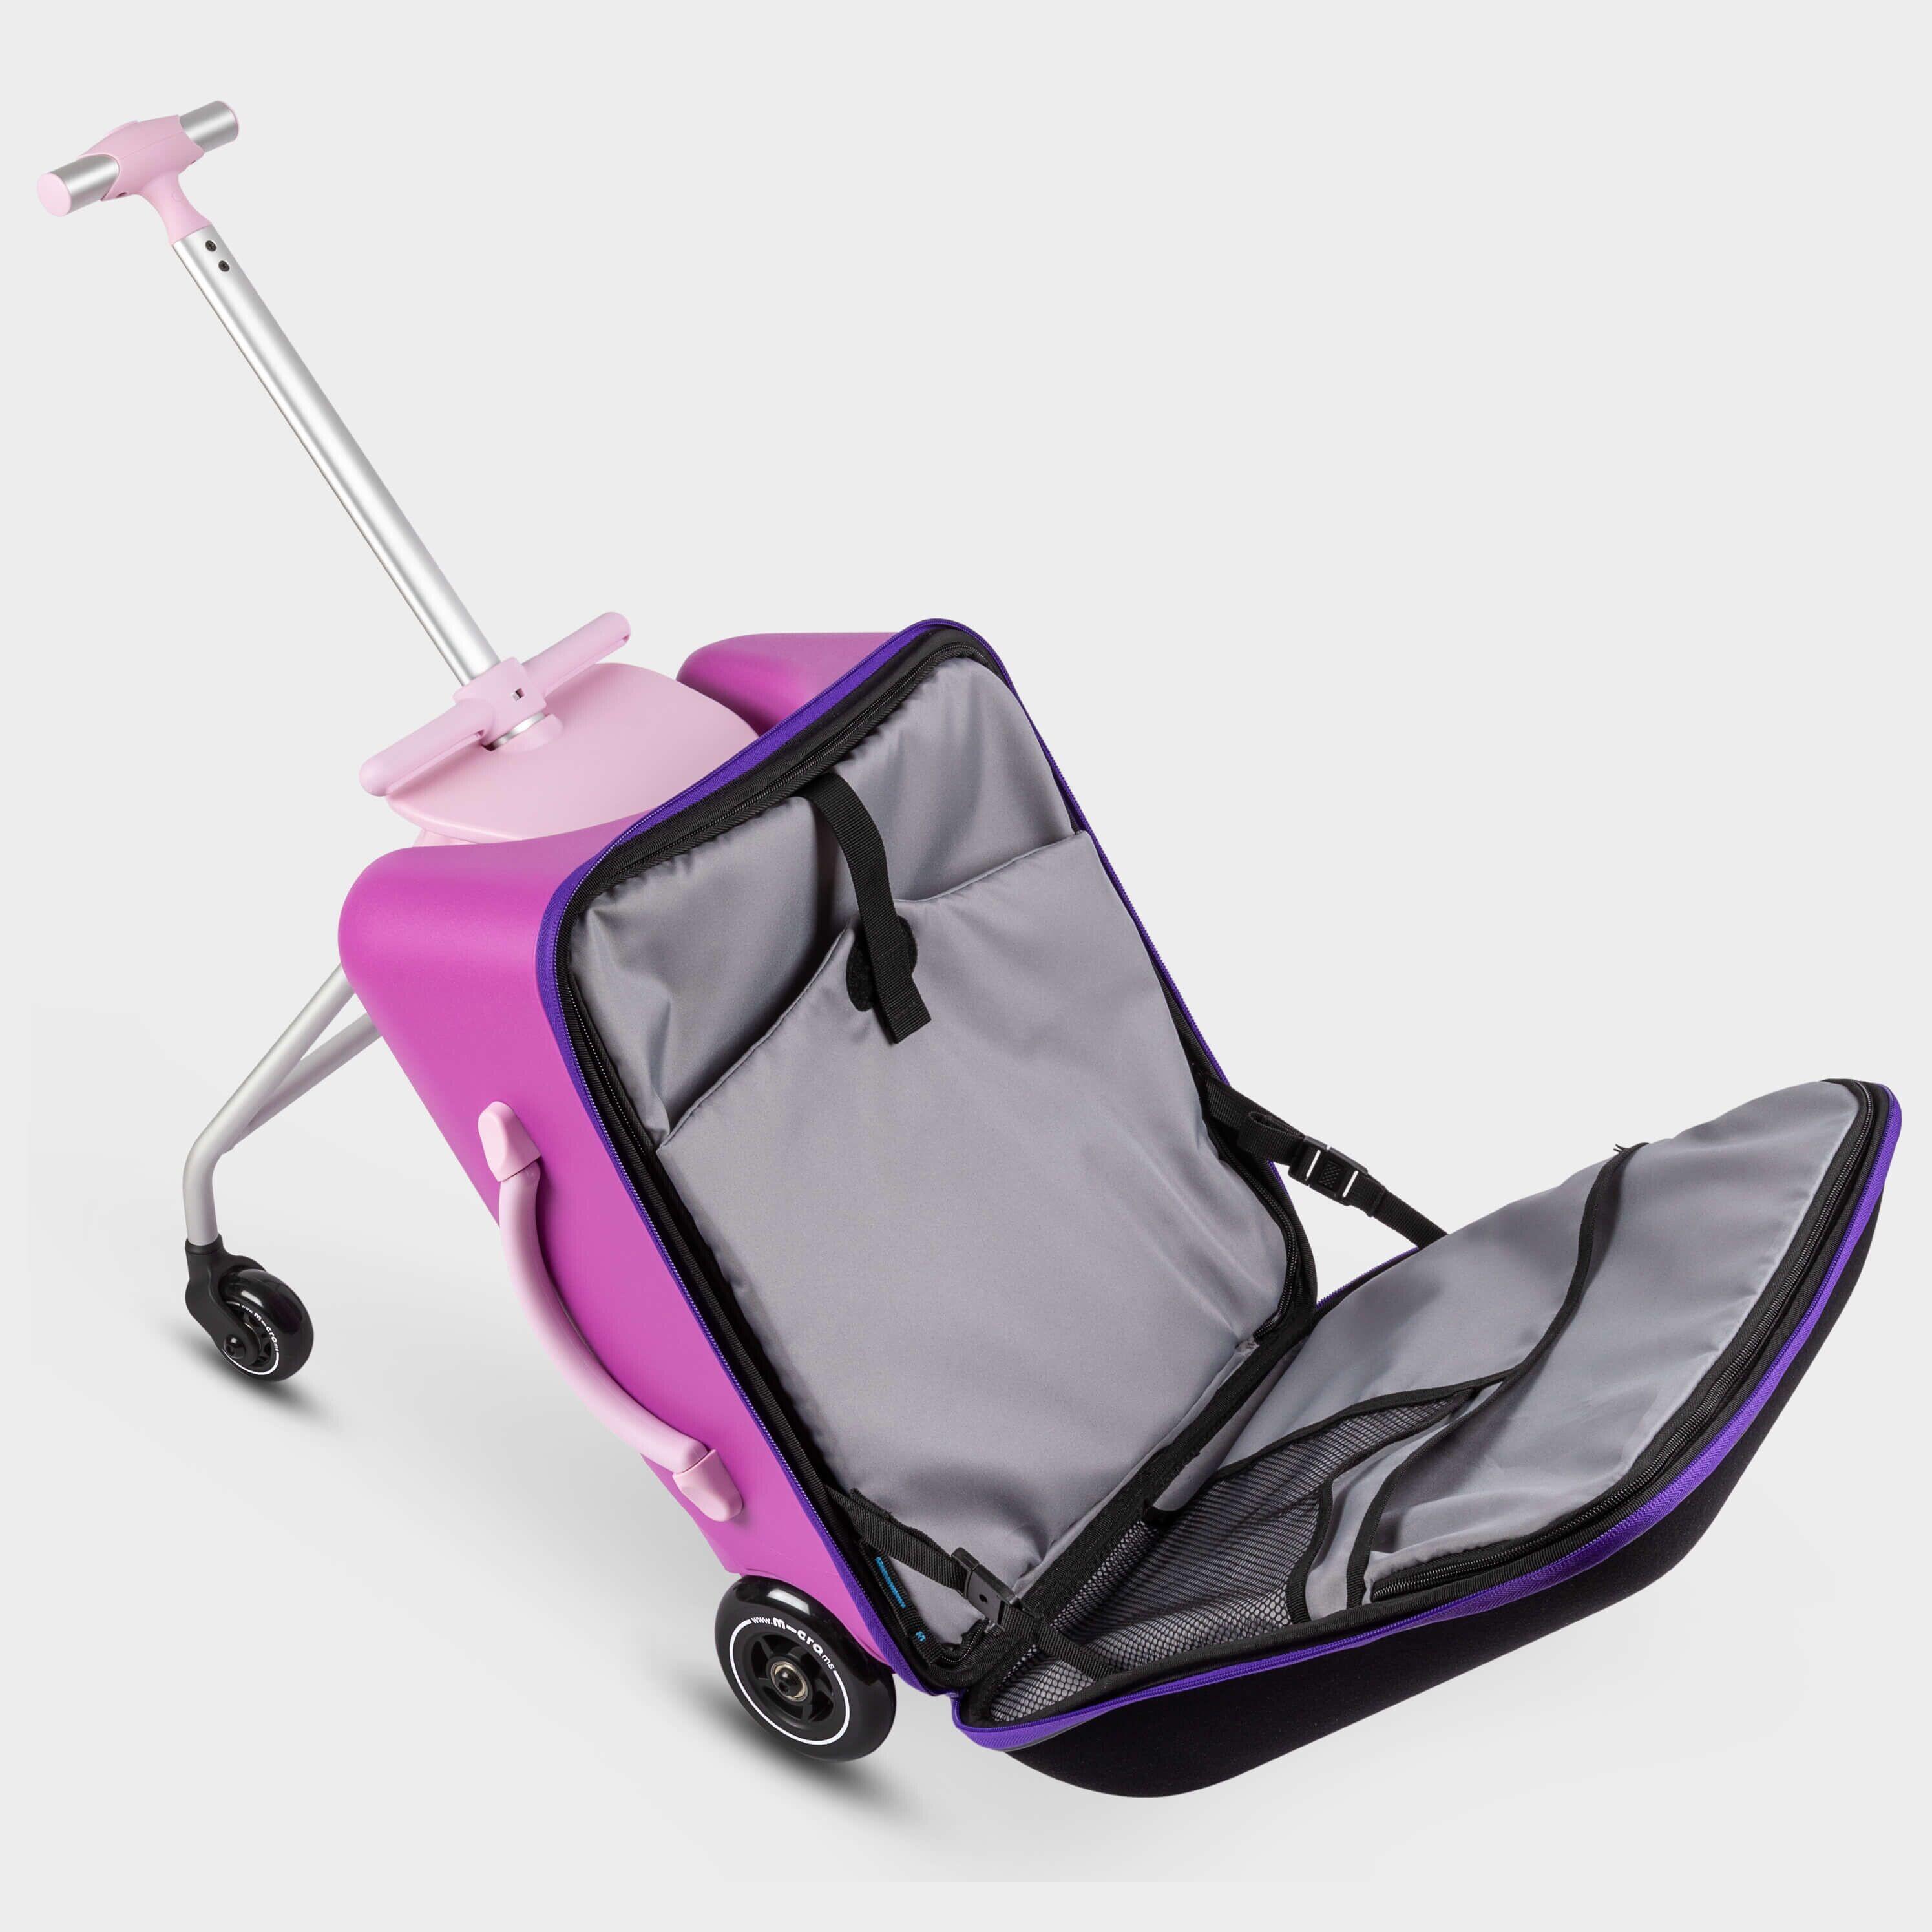 Micro Luggage Trike Scooter: Violet Pink 5/7